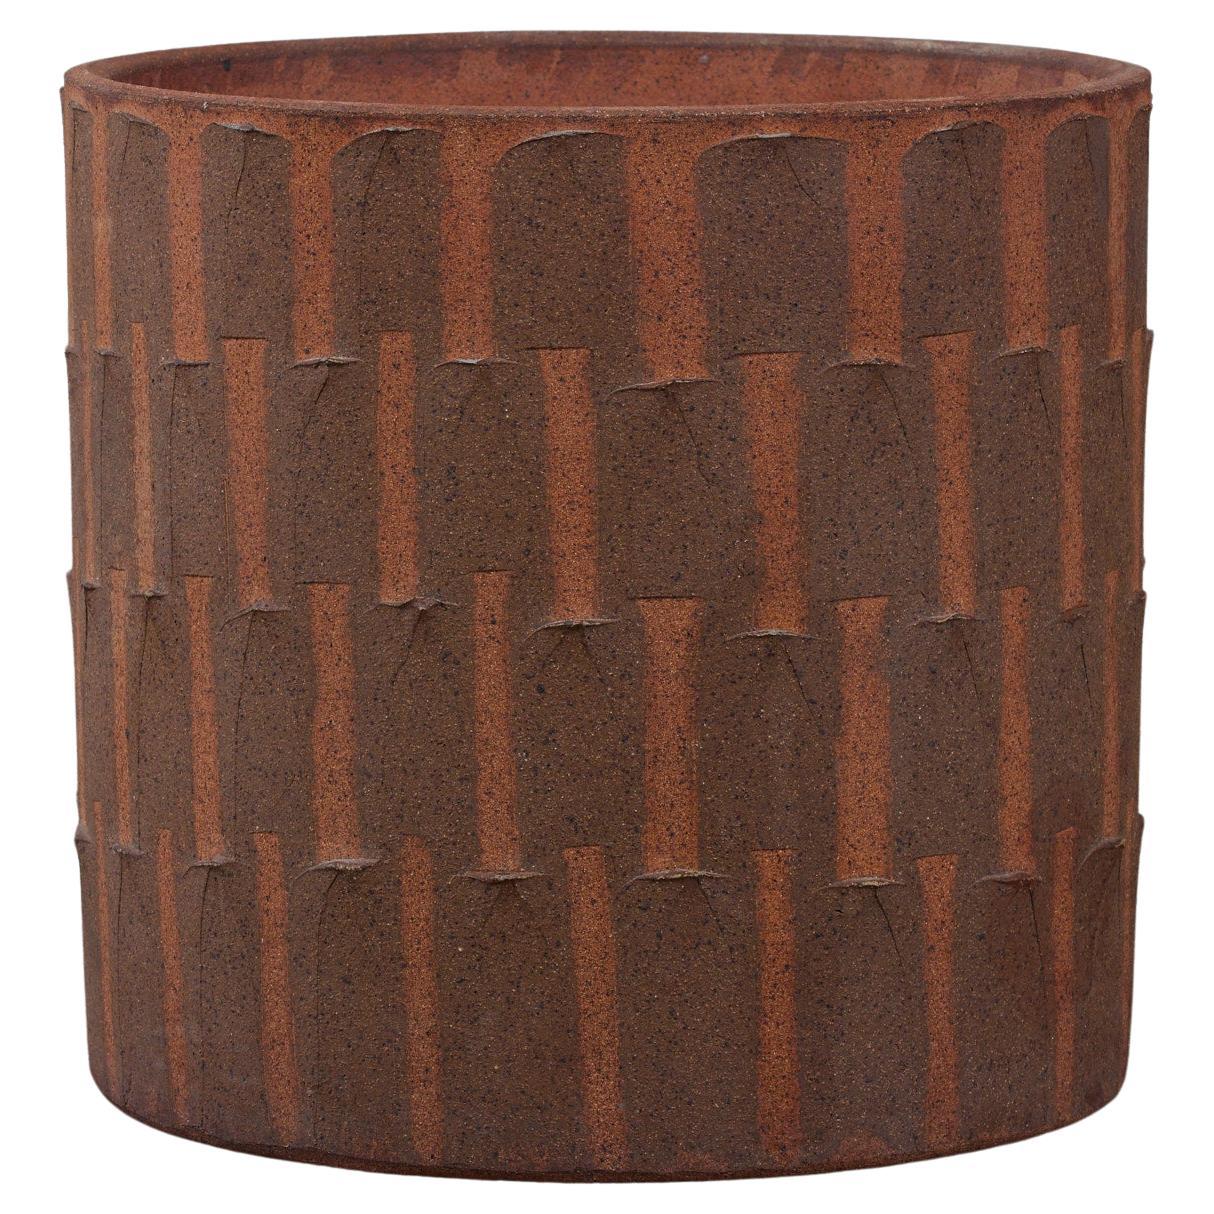 David Cressey Ribbed Stoneware Pro/Artisan Planter for Architectural Pottery